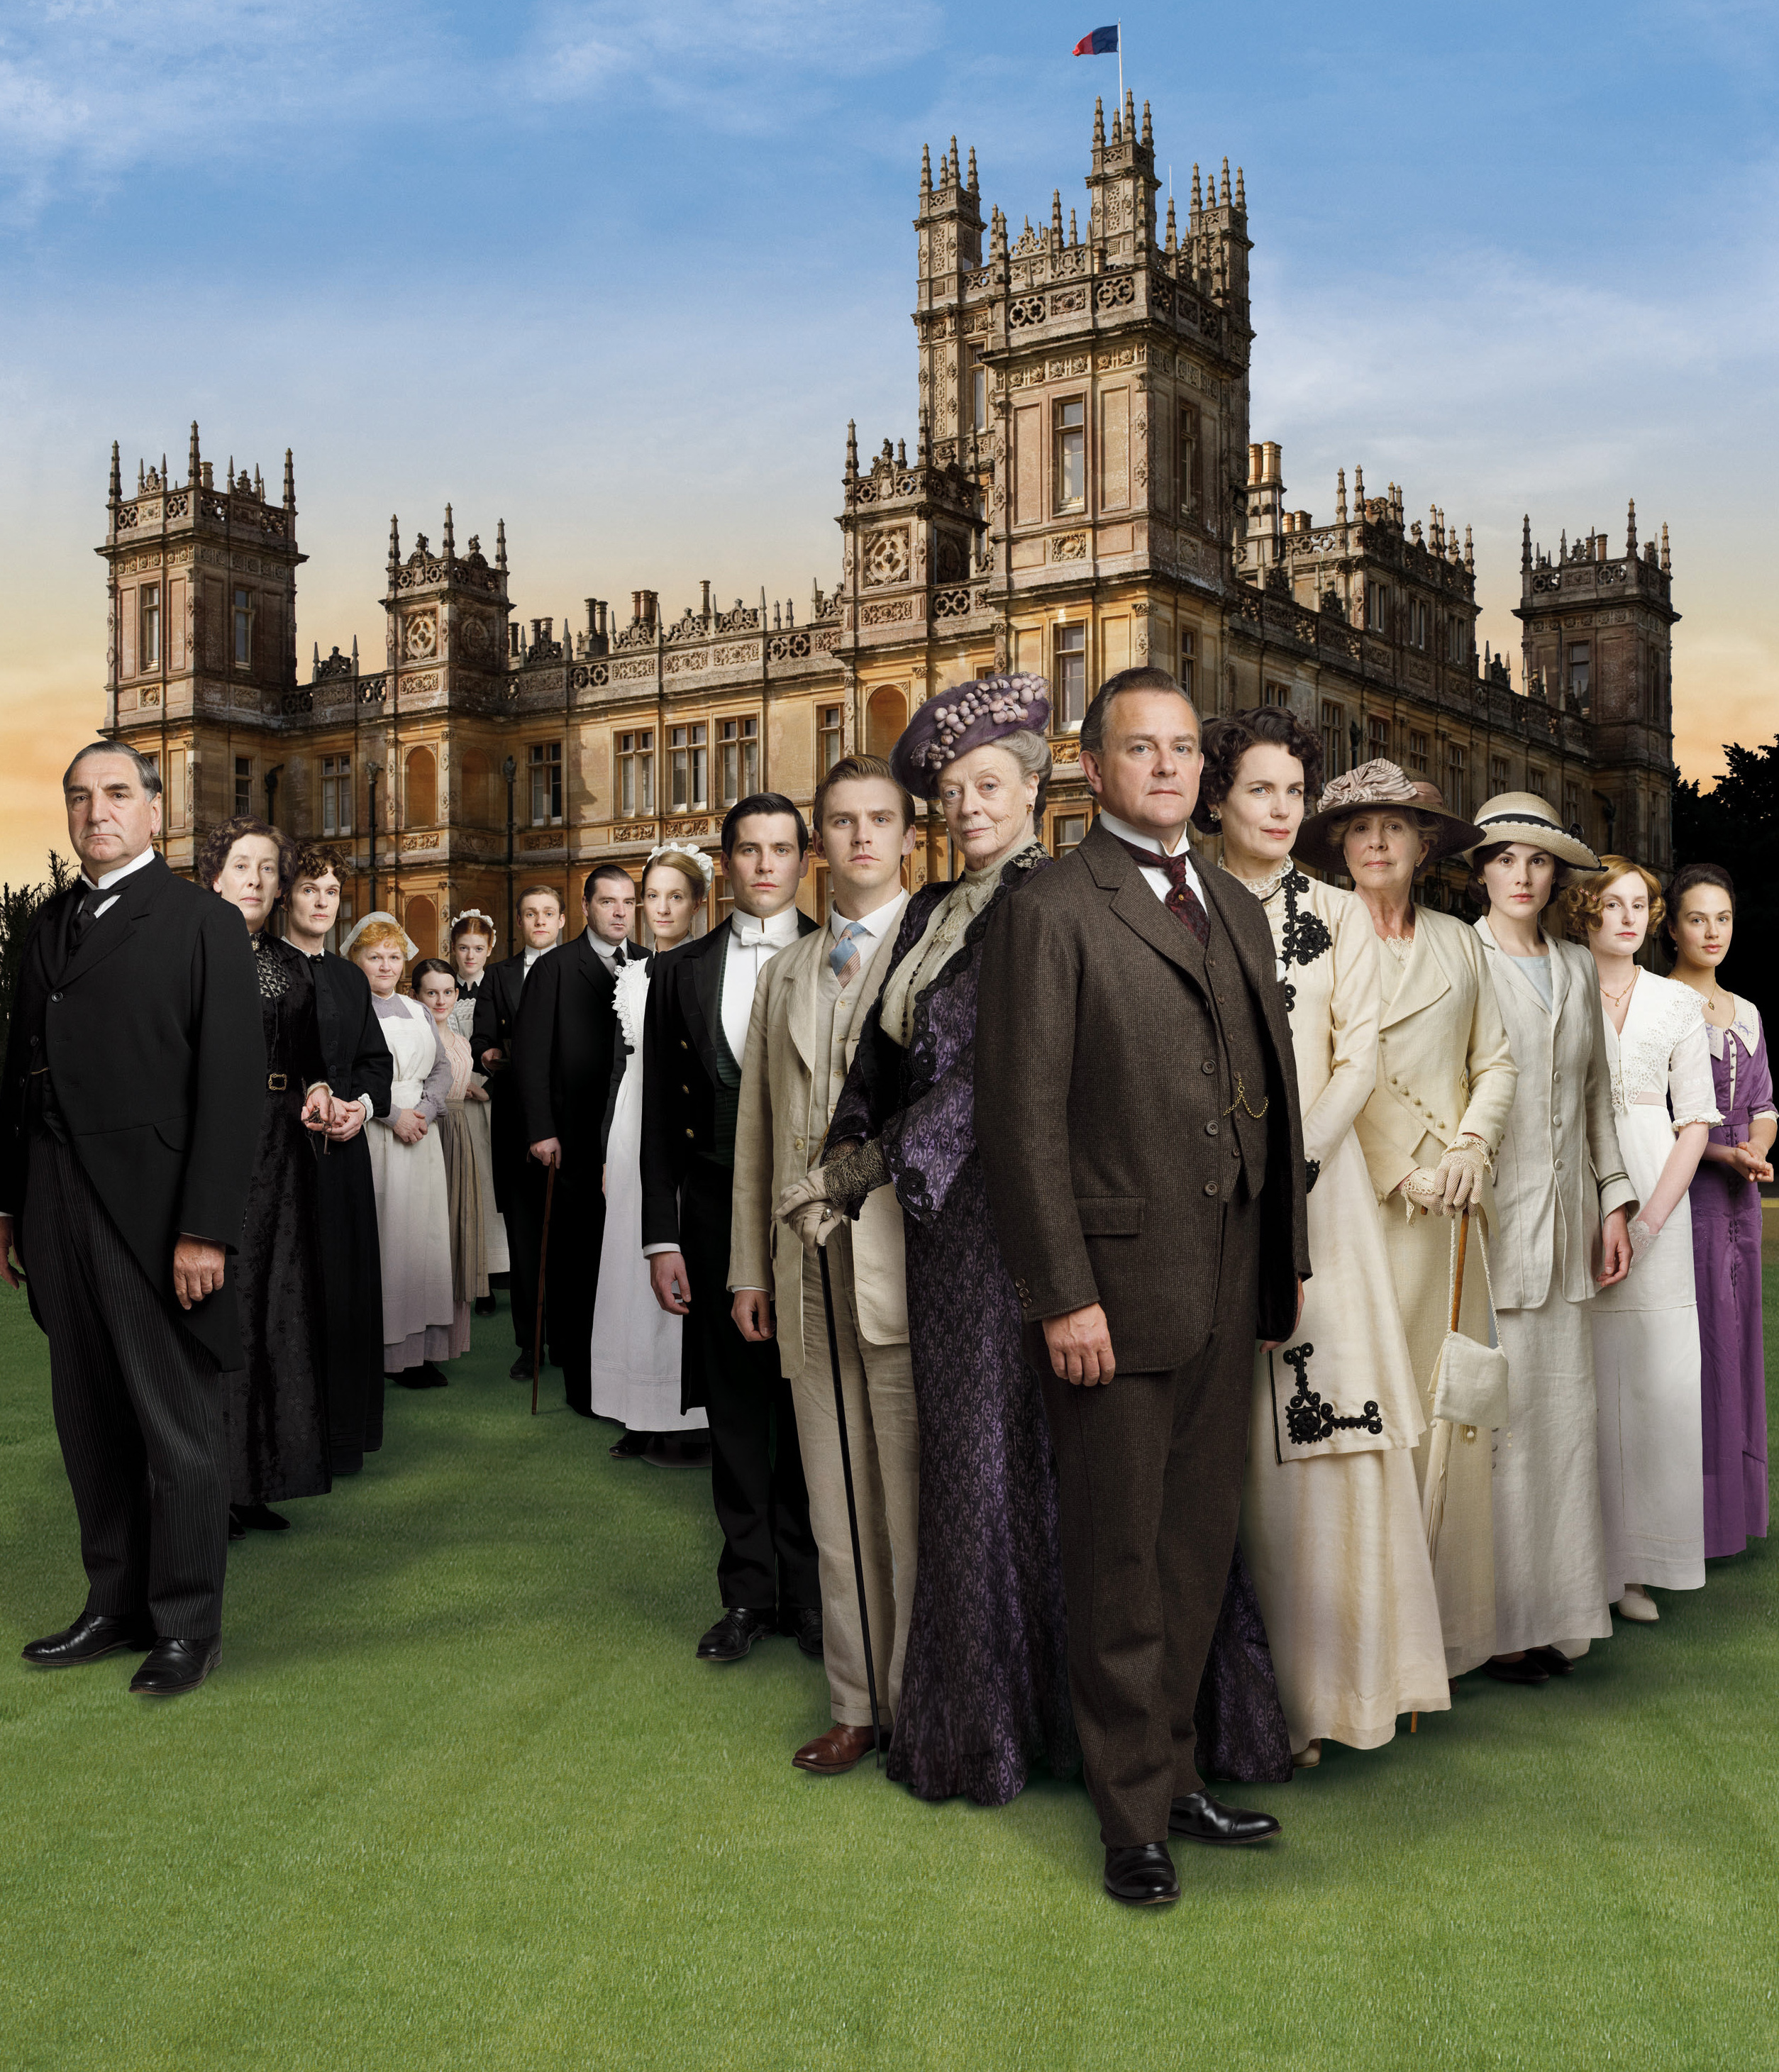 <p>Here's how the cast of the PBS series "Downton Abbey" looked -- and what they wore -- when it all started. They're seen here on the season 1 poster: (from left) Jim Carter, Phyllis Logan, Siobhan Finneran, Lesley Nicol, Sophie McShera, Rose Leslie, Thomas Howes, Brendan Coyle, <a href="https://www.wonderwall.com/celebrity/profiles/overview/joanne-froggatt-1487.article">Joanne Froggatt</a>, Rob James-Collier, Dan Stevens, Maggie Smith, Hugh Bonneville, Elizabeth McGovern, Penelope Wilton, <a href="https://www.wonderwall.com/celebrity/profiles/overview/michelle-dockery-1488.article">Michelle Dockery</a>, Laura Carmichael and Jessica Brown Findlay.</p>